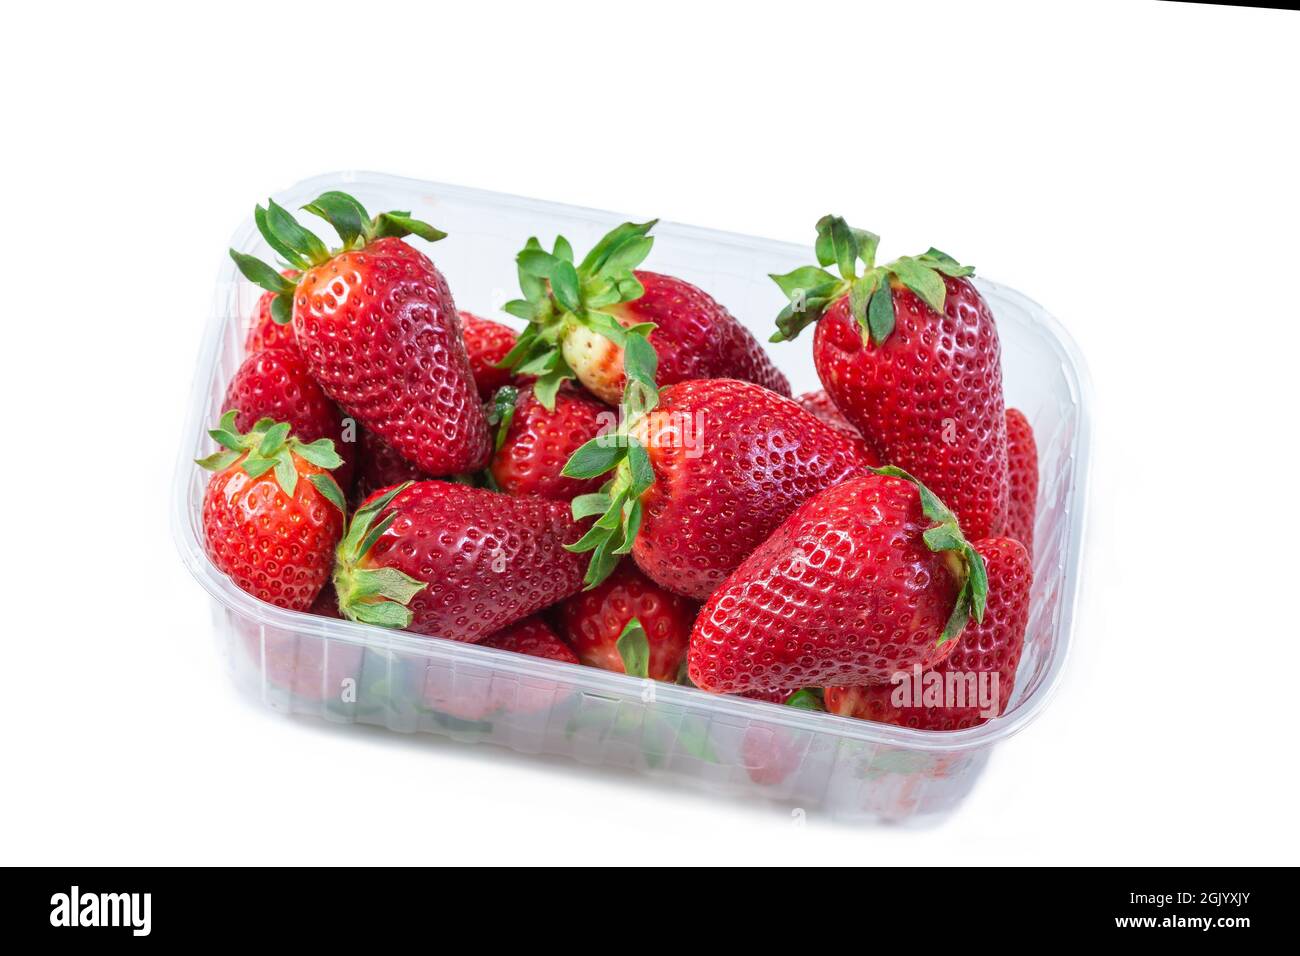 Strawberry in plastic, transparent container box, isolated on white background. Stock Photo